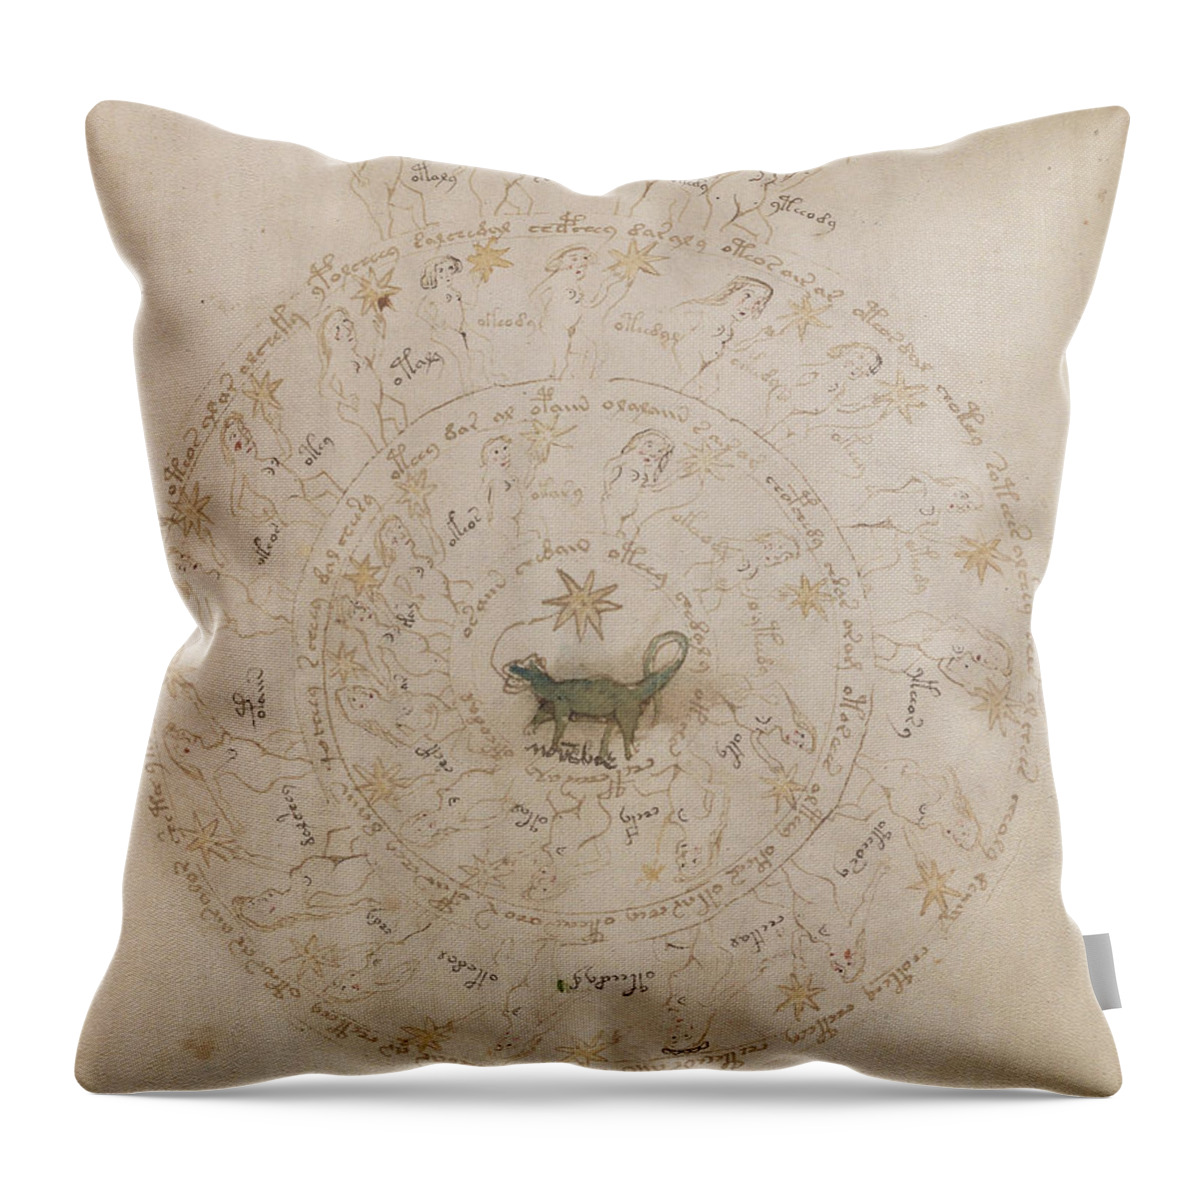 Astronomy Throw Pillow featuring the drawing Voynich Manuscript Astro Scorpio by Rick Bures